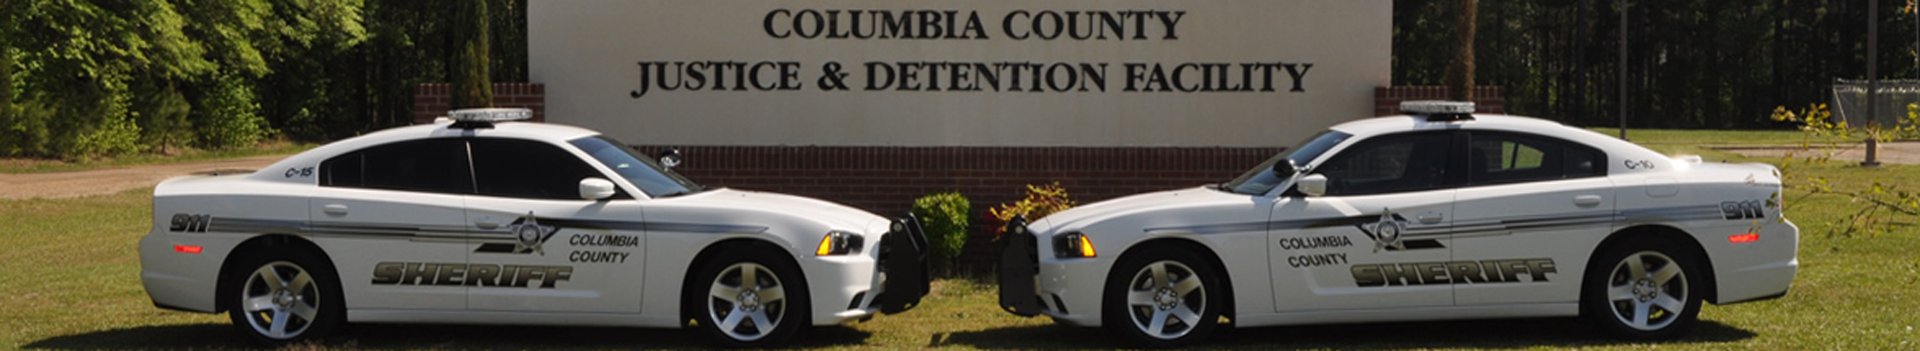 Two squad cars parked in front of the Columbia County Justice and Detention Facility